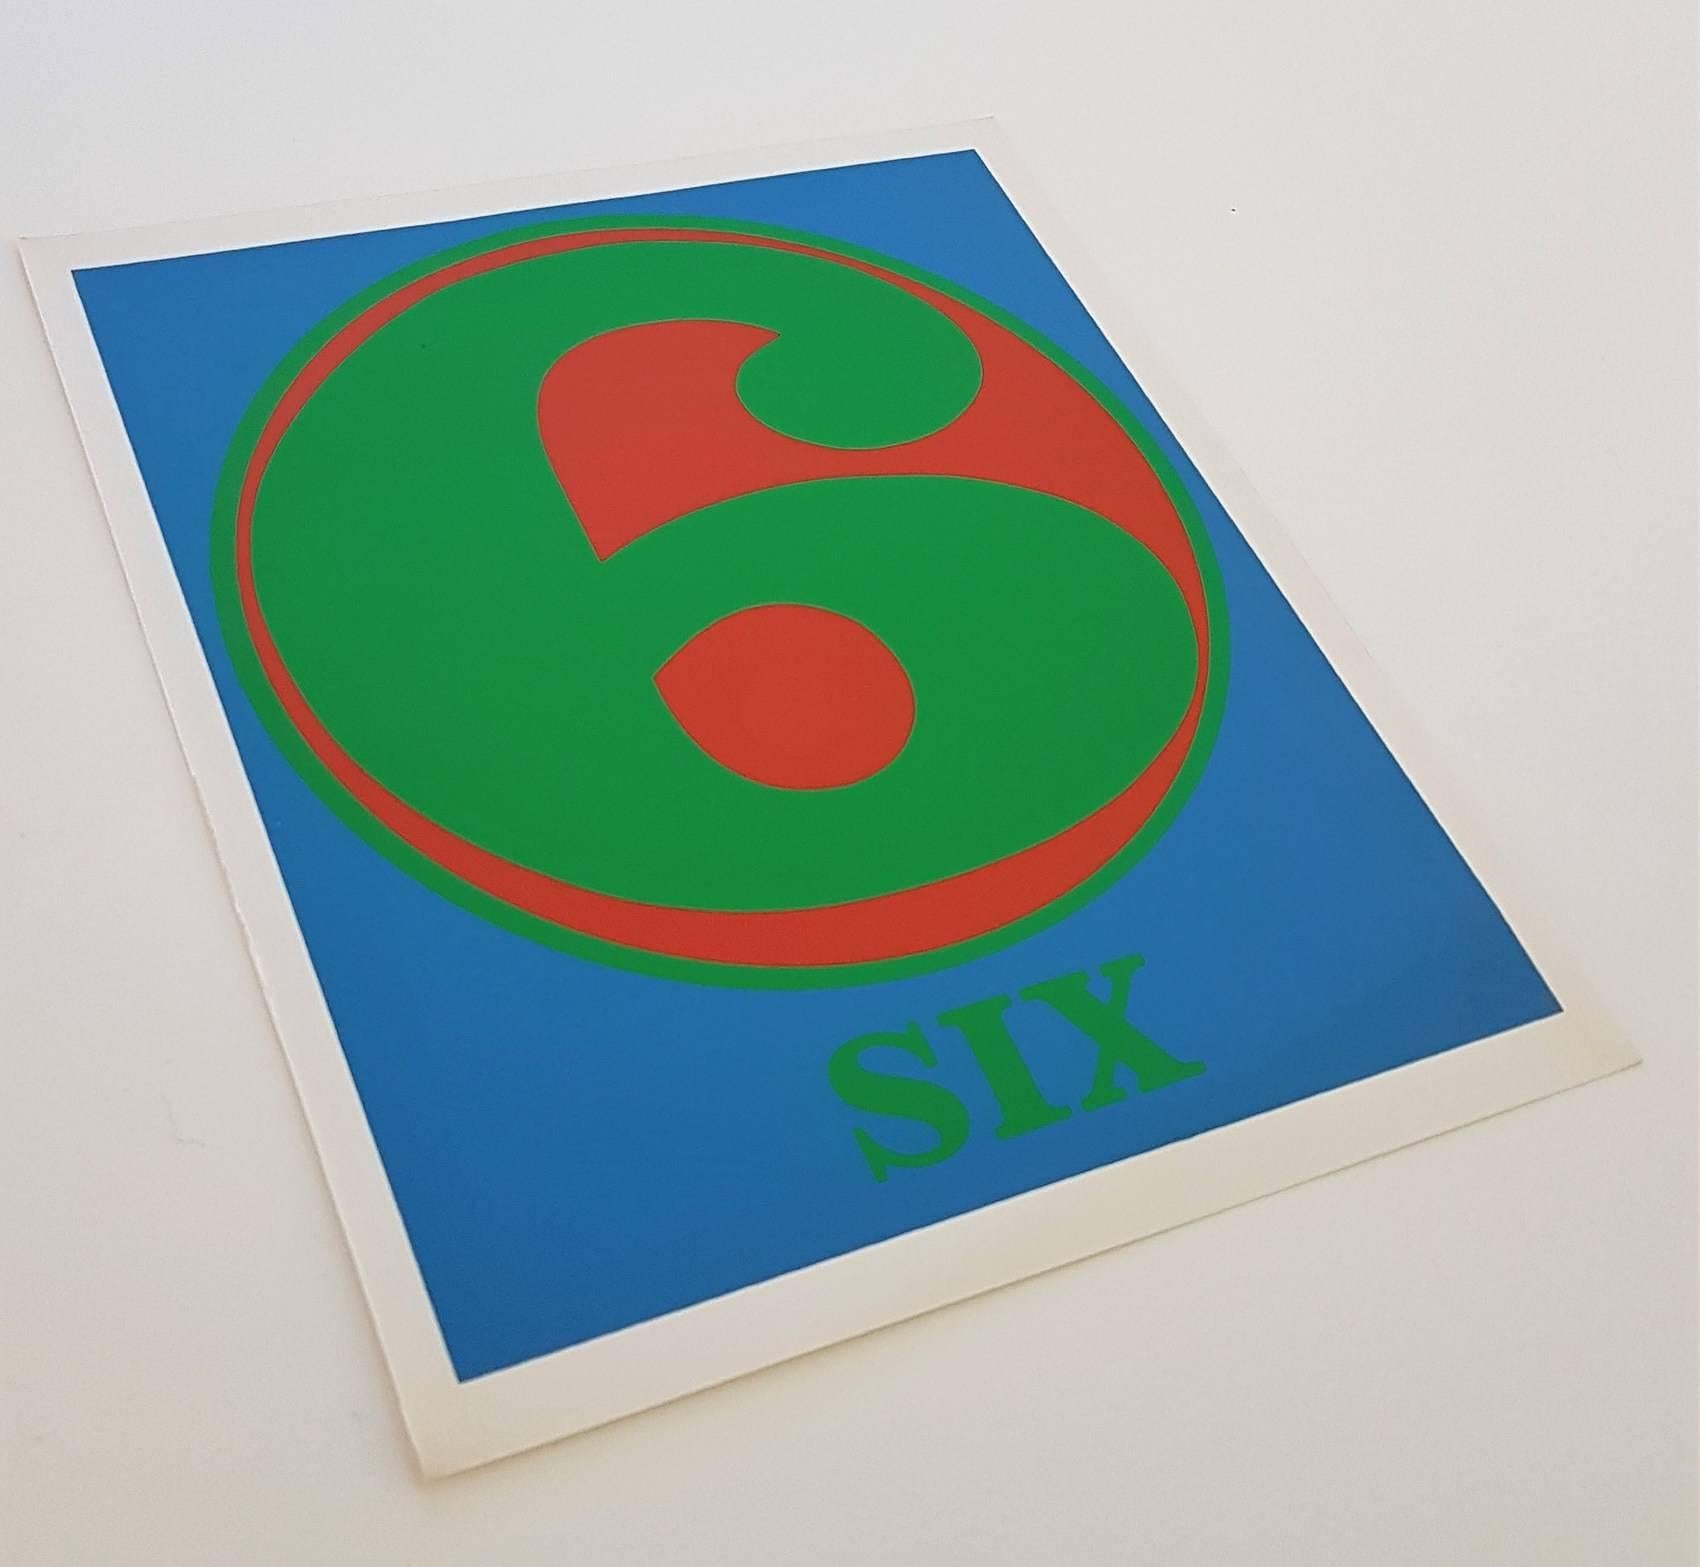 Number Suite - Six - Print by Robert Indiana